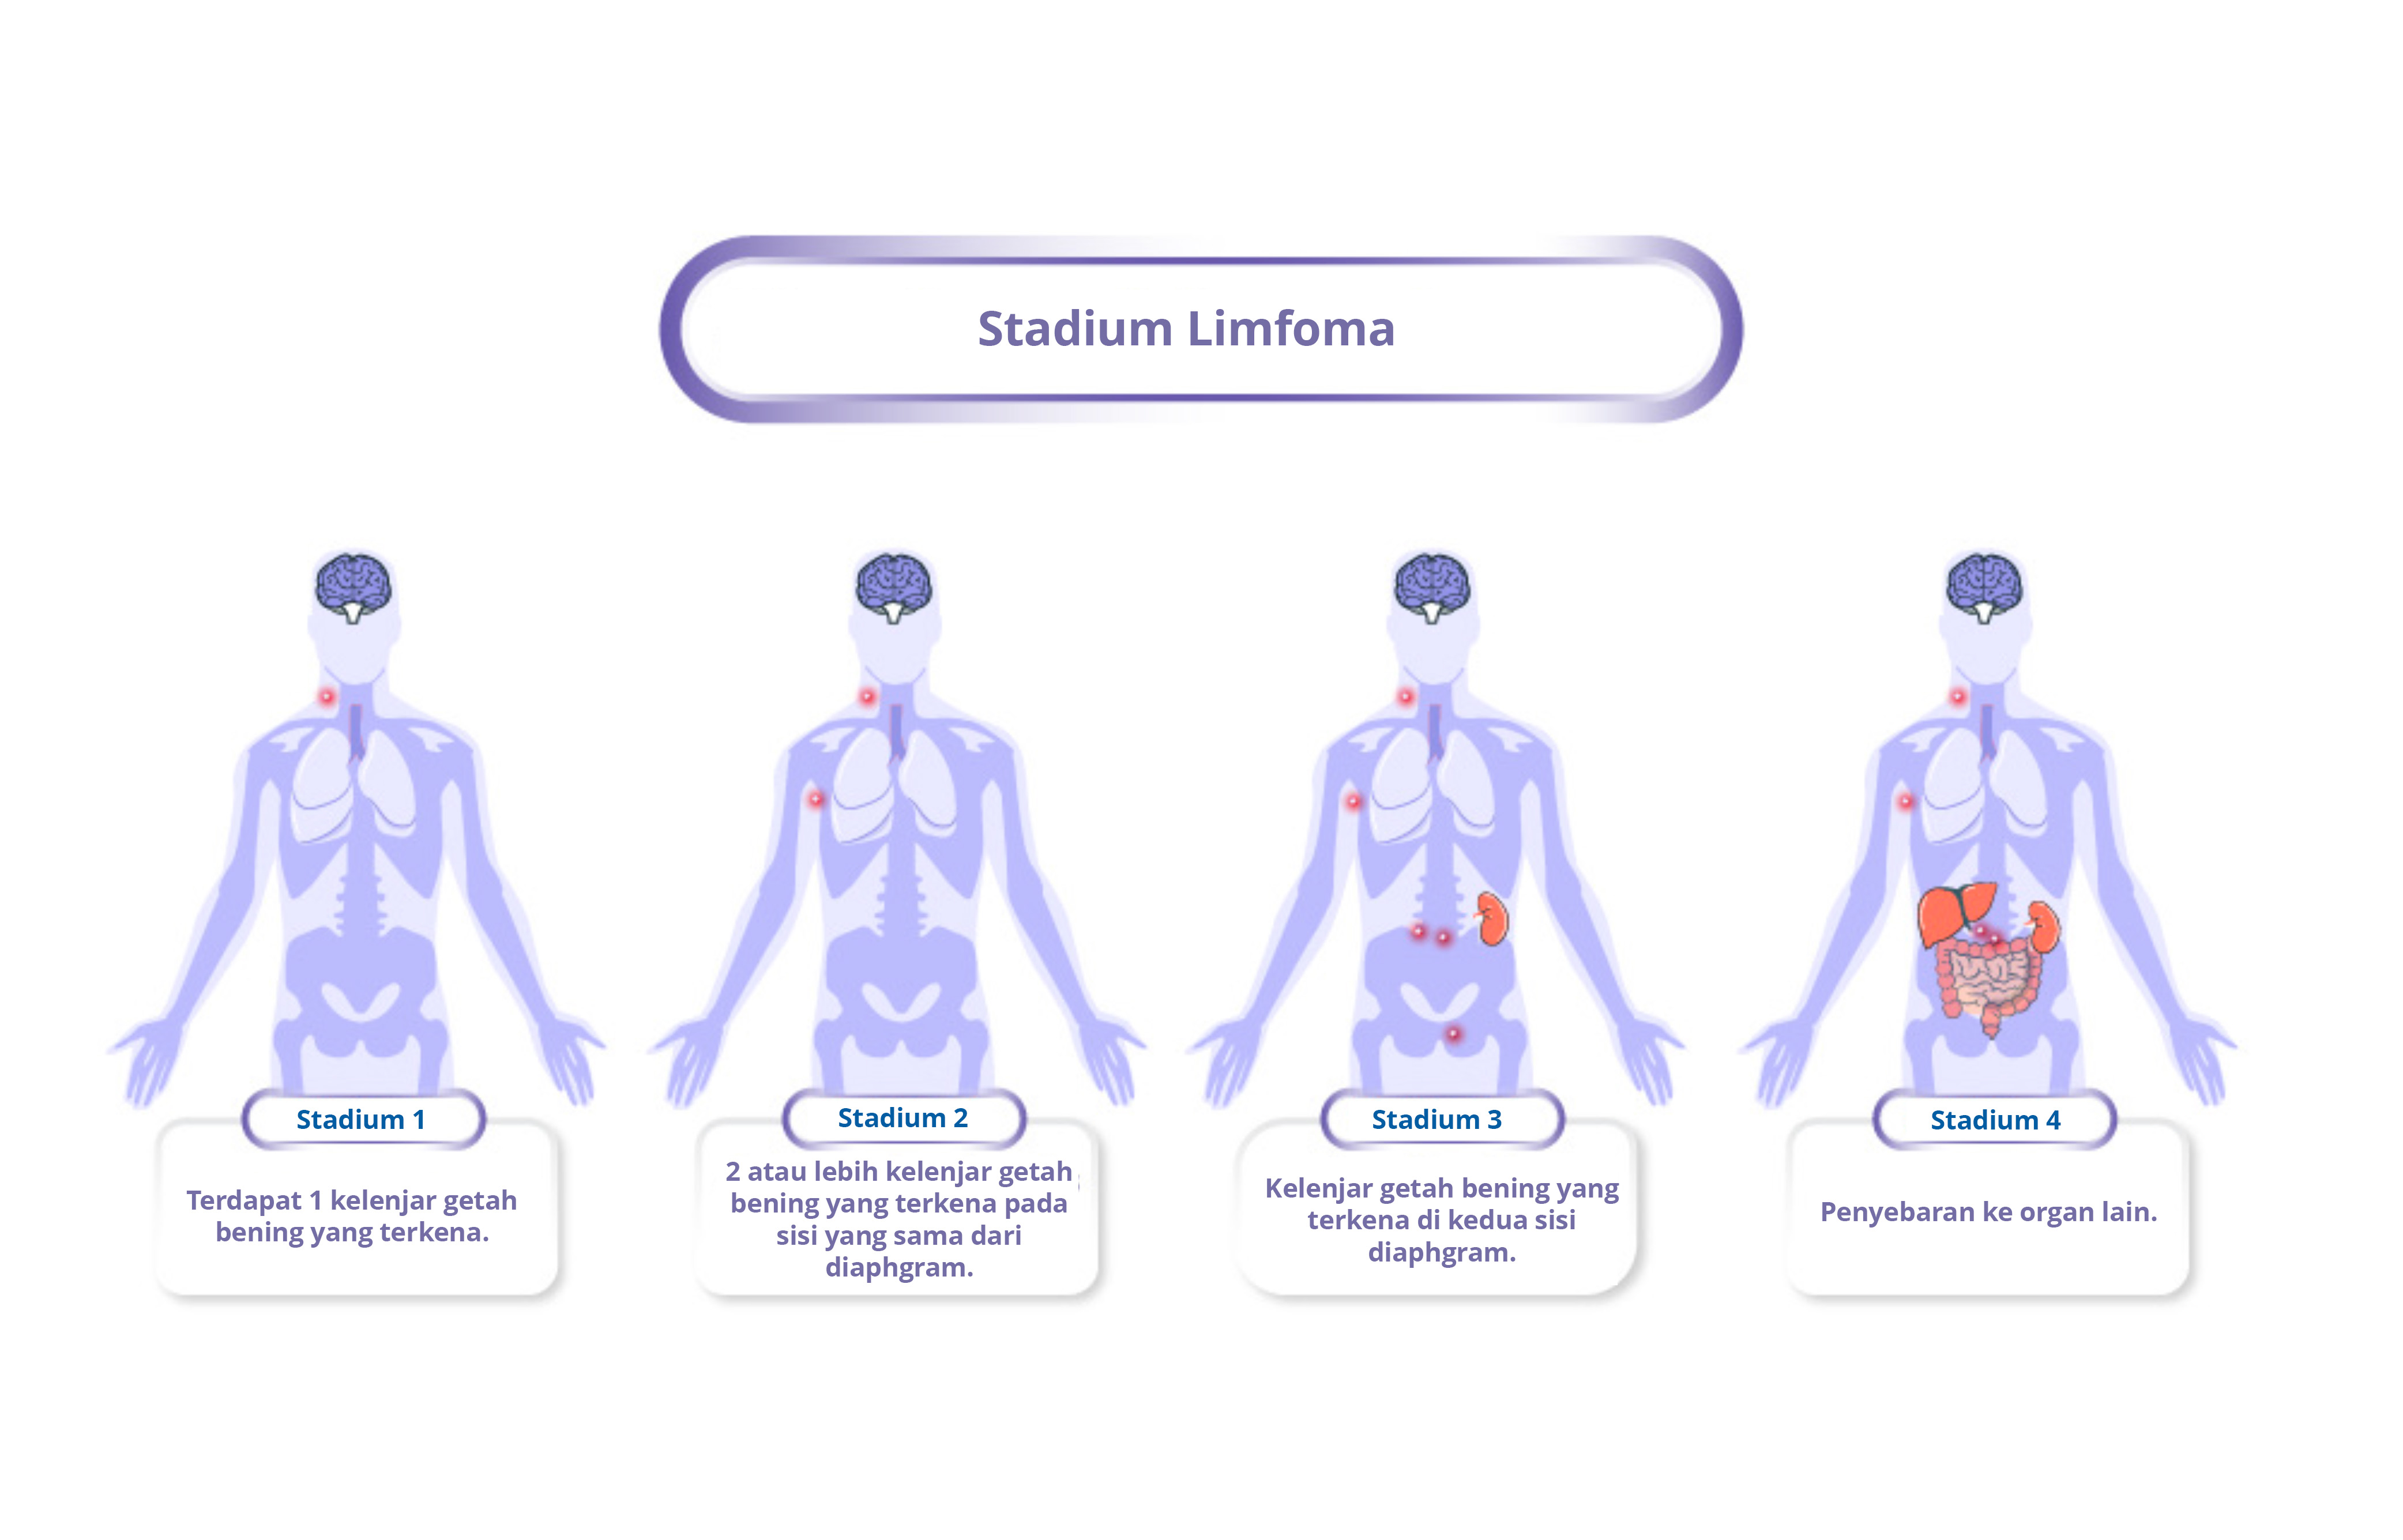 Staging of Lymphoma